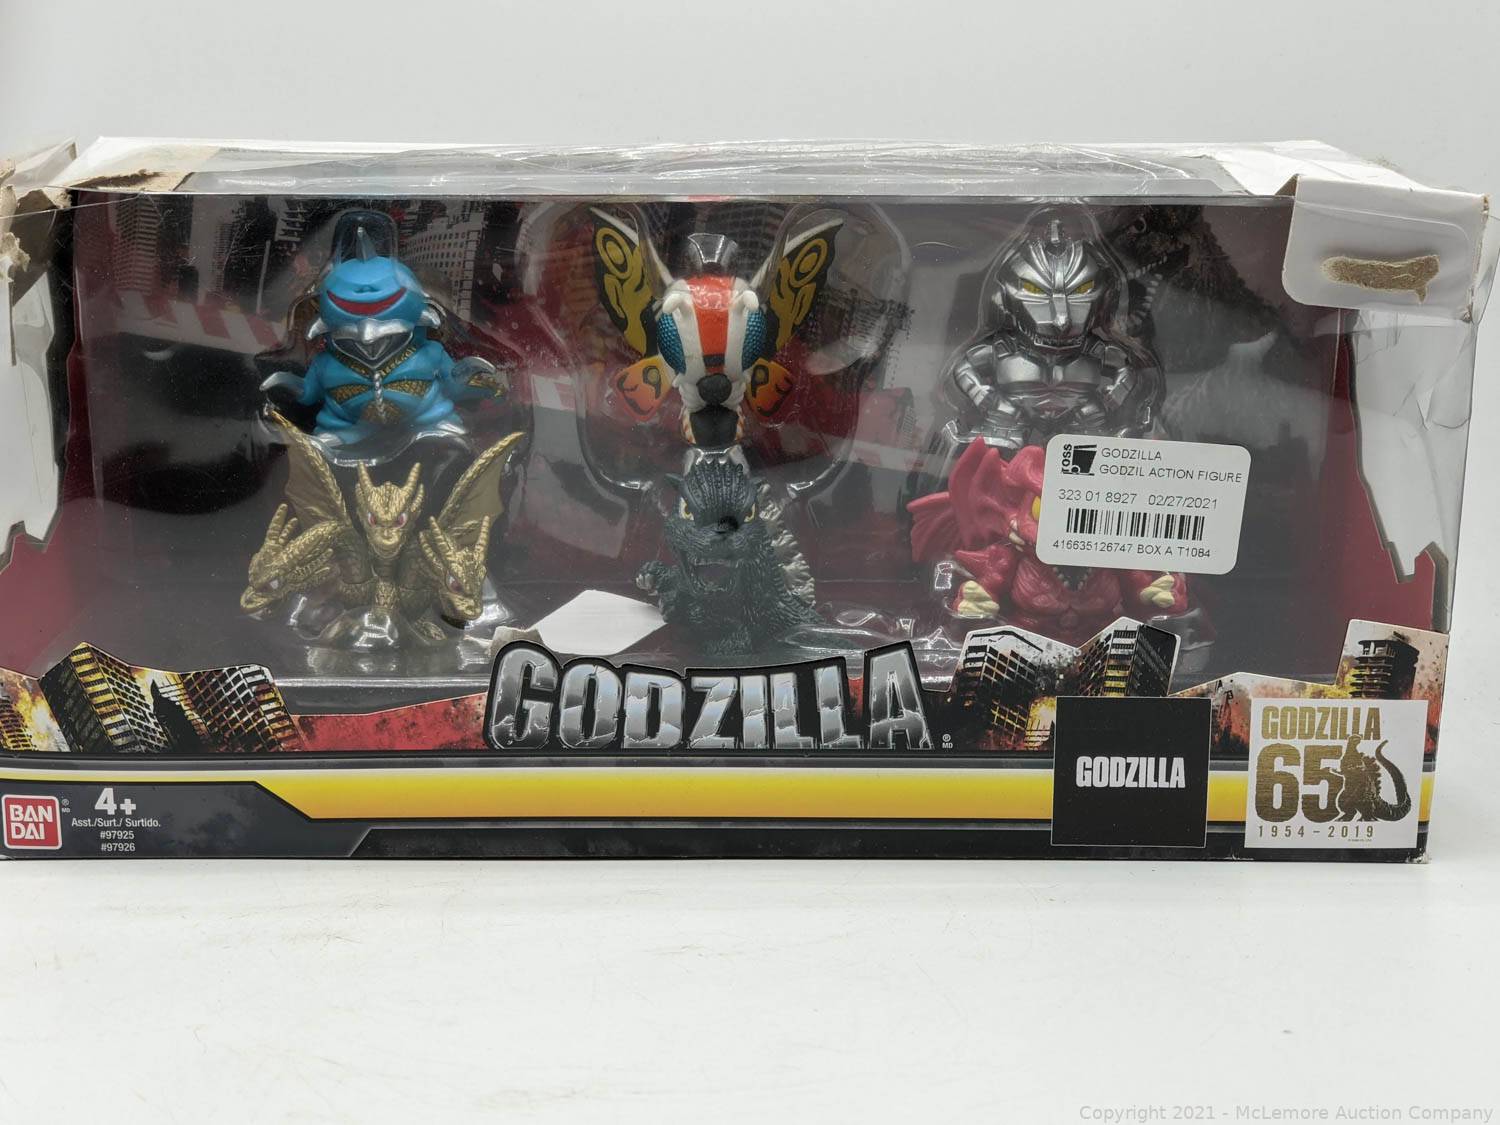 Bandai Godzilla 65th Anniversary CHIBI Figures Pack of 6 for sale online 